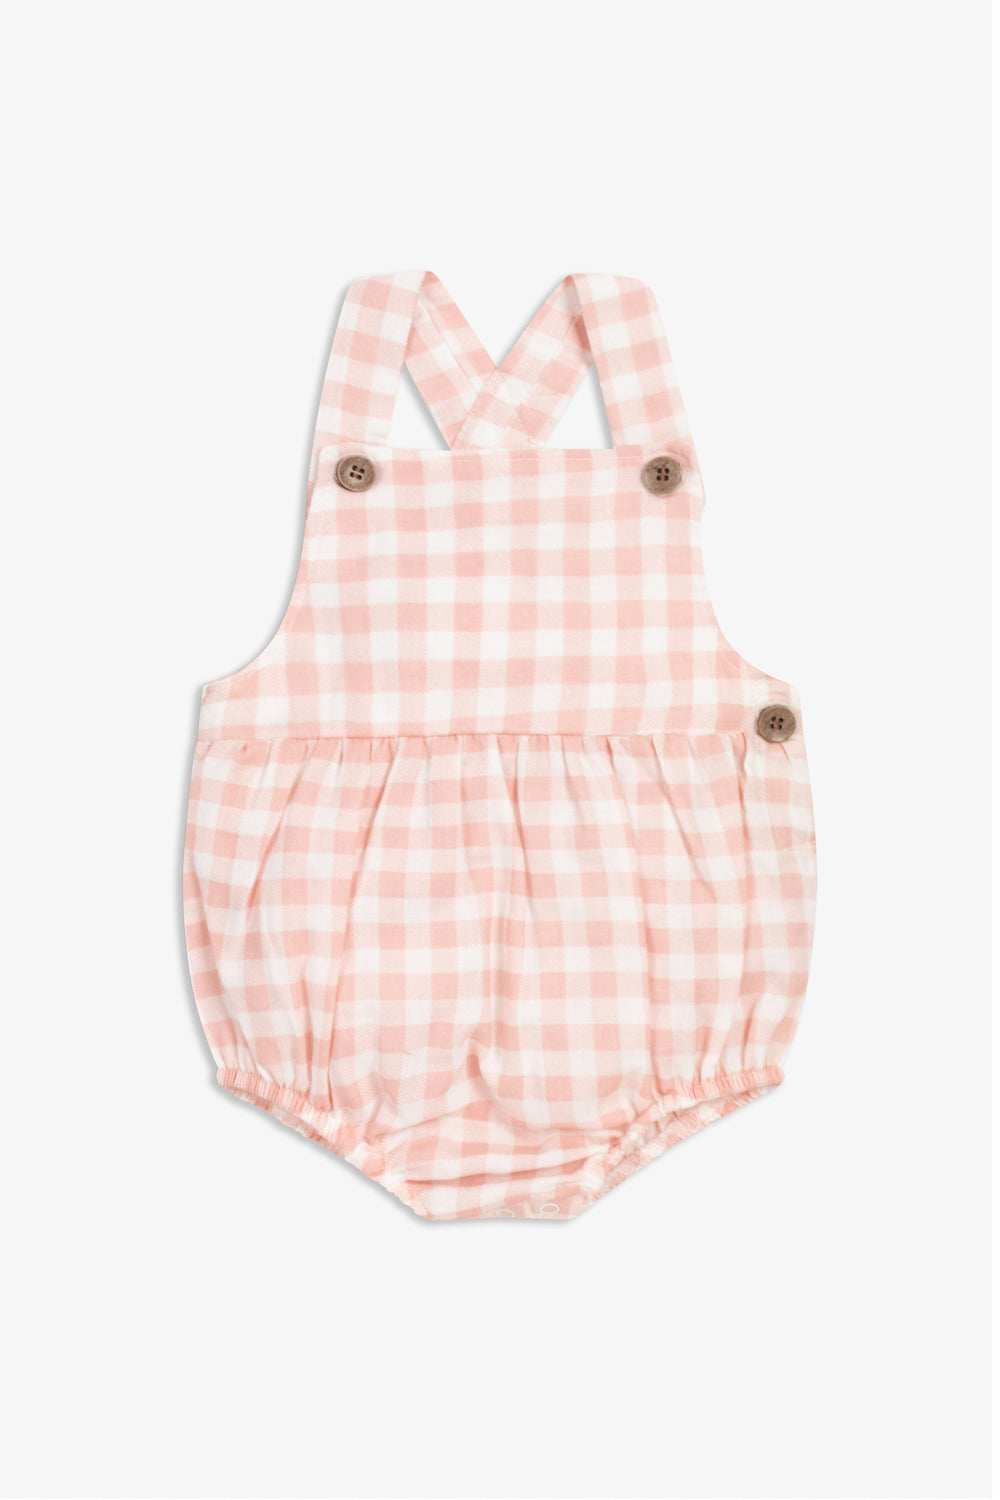 Cotton Shorty Dungaree/Body, rose gingham print